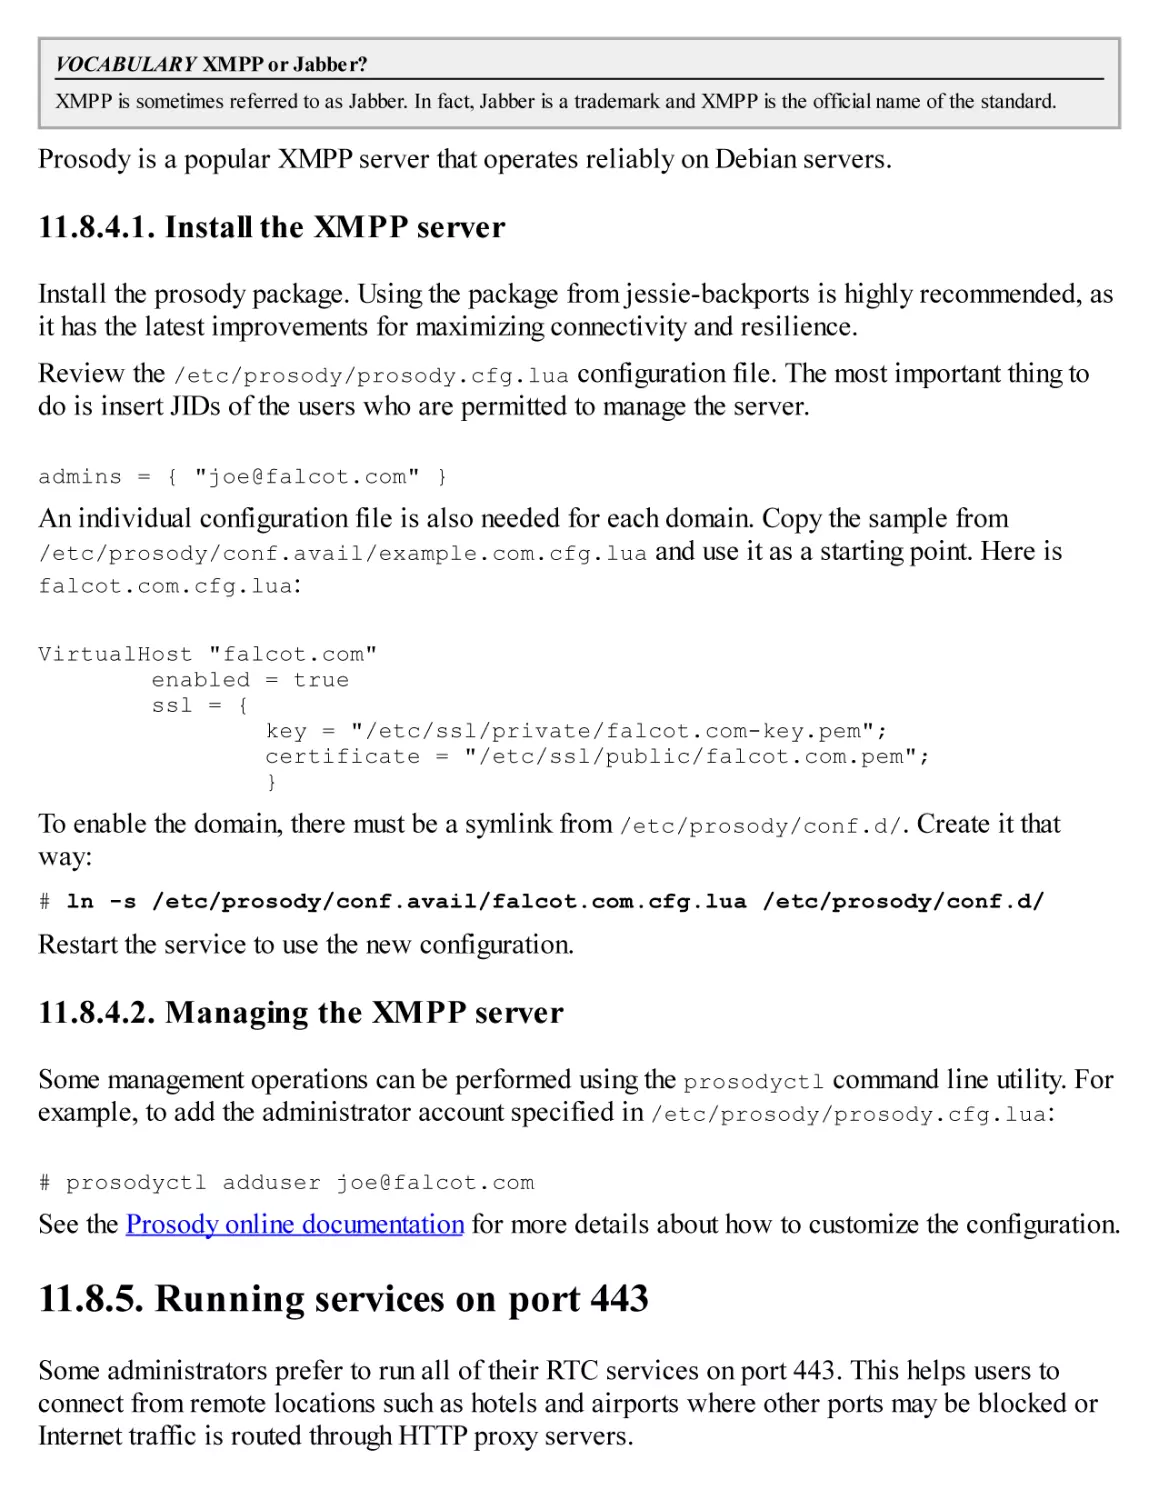 11.8.4.1. Install the XMPP server
11.8.4.2. Managing the XMPP server
11.8.5. Running services on port 443